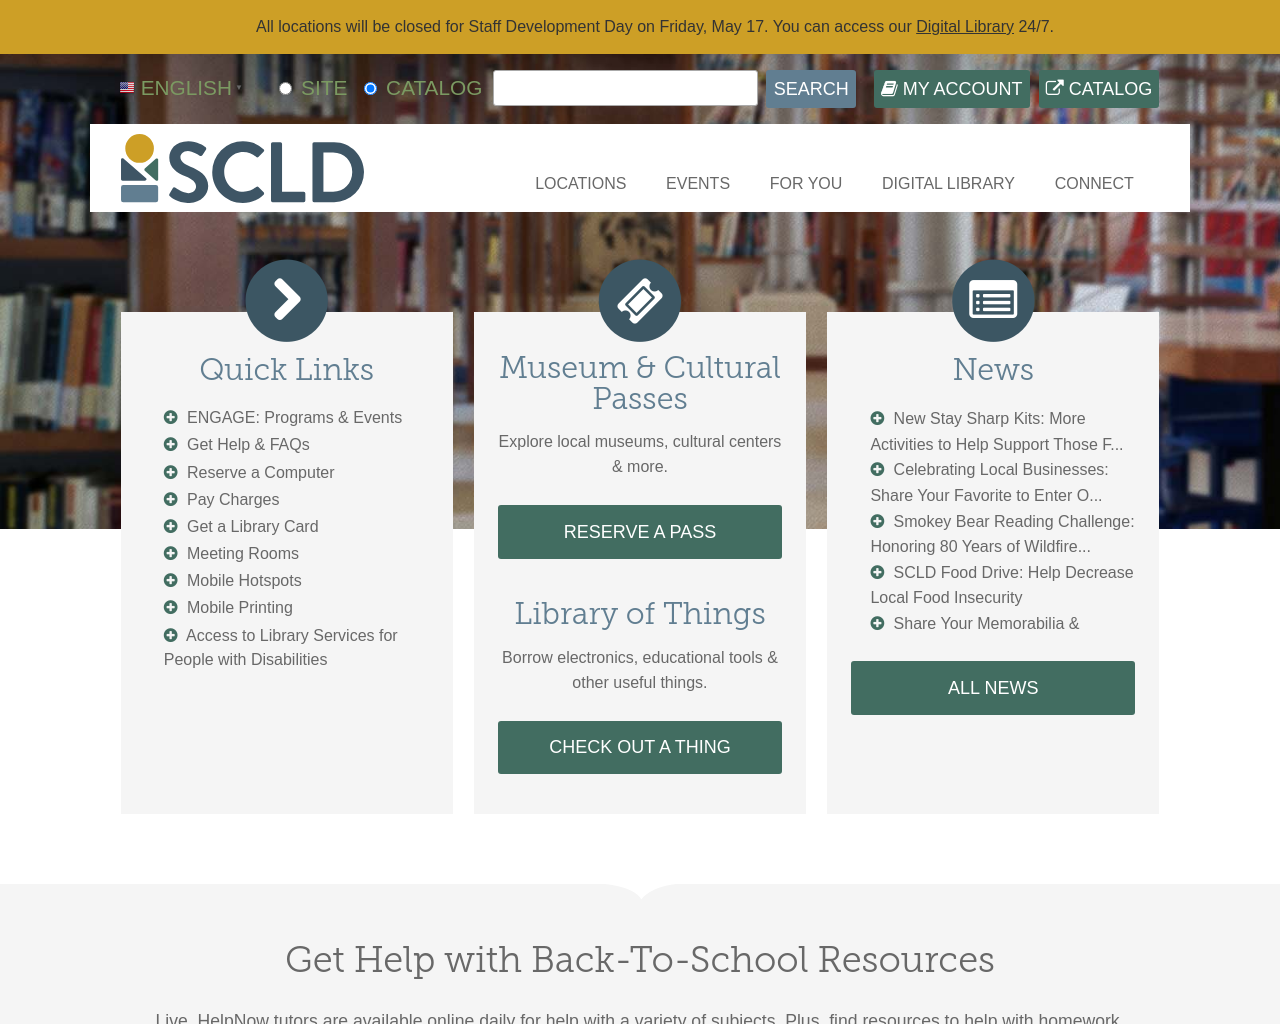 scld.org